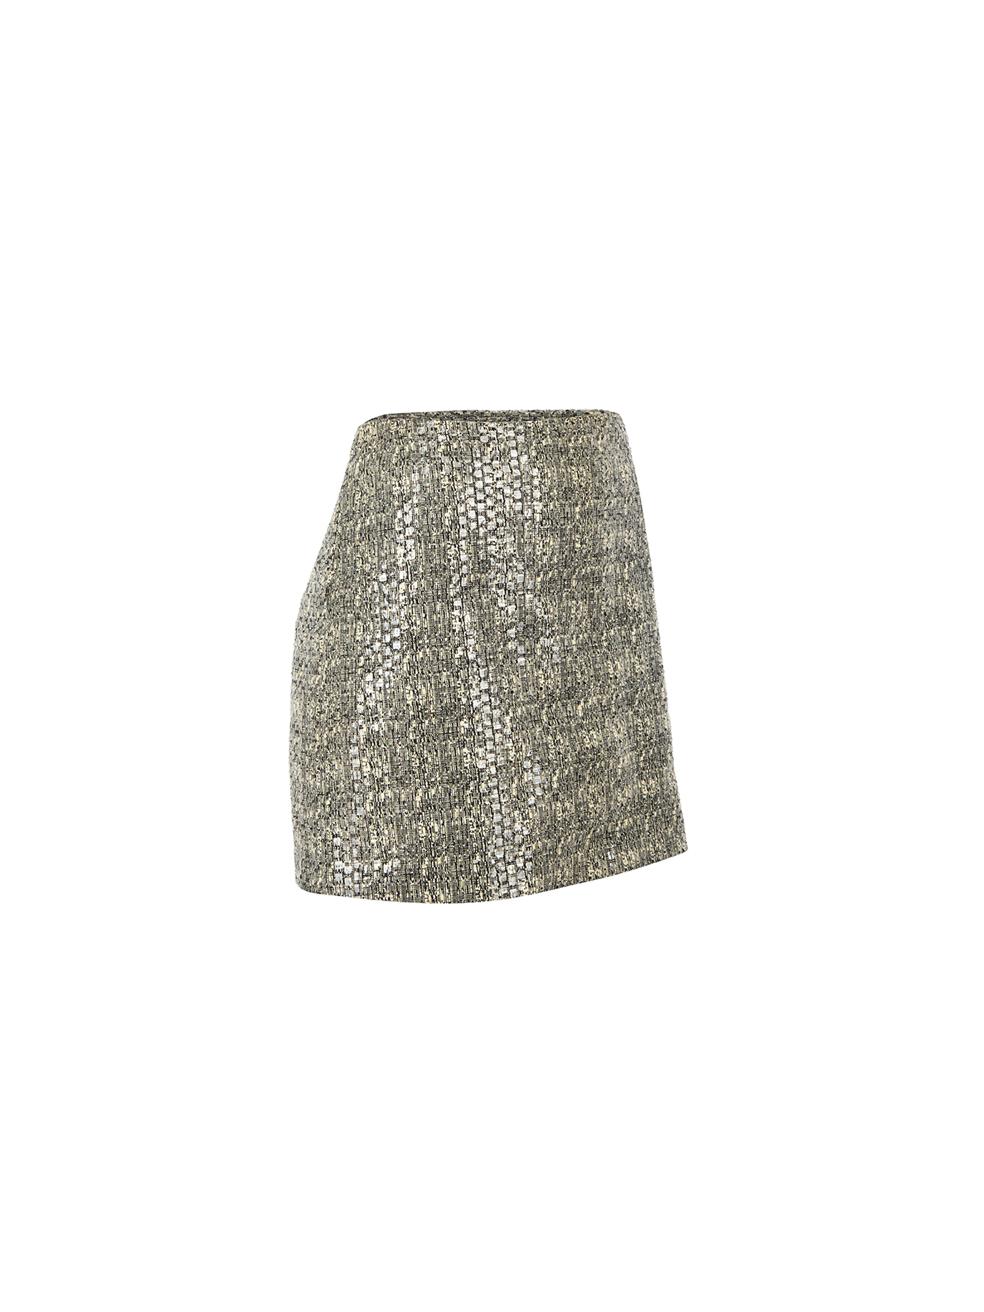 CONDITION is Very good. Hardly any visible wear to skirt is evident on this used alice + olivia designer resale item. 



Details


Grey

Cotton

Textured pattern

Micro mini skirt

Figure hugging fit

Back zip fastening





Made in